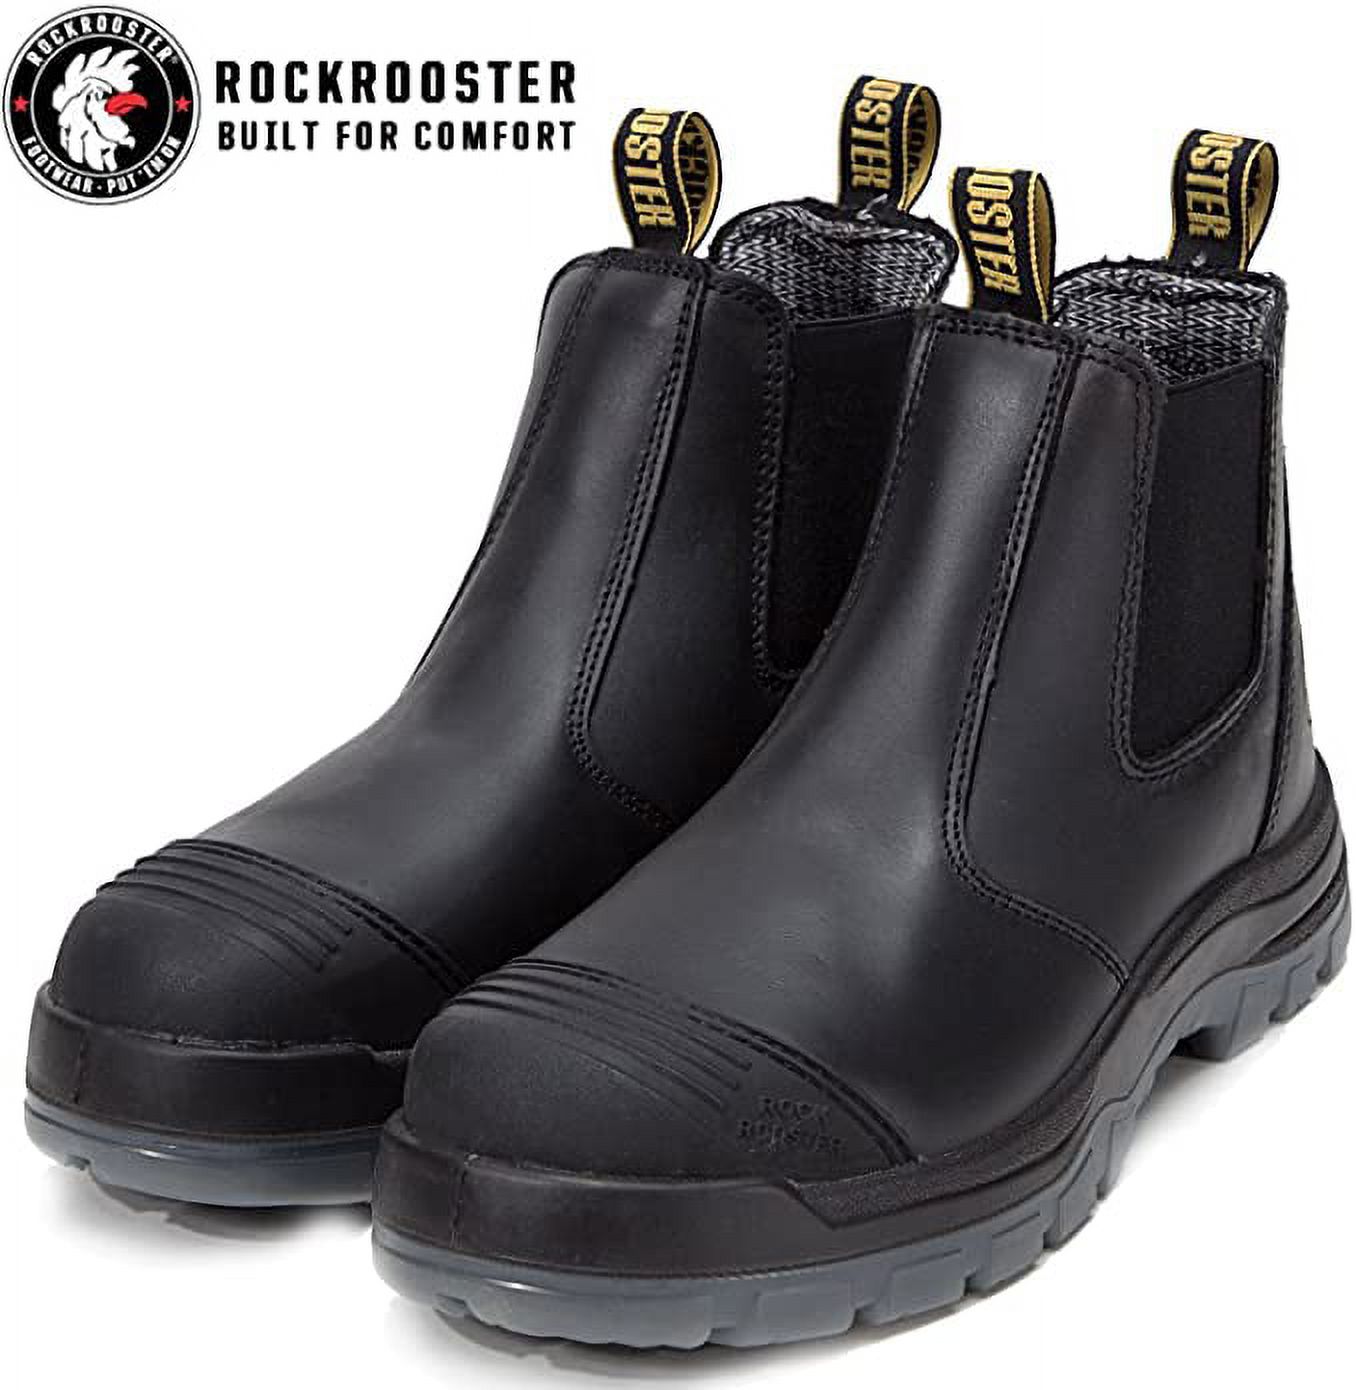 ROCKROOSTER Work Boots for Men, 6 inch Steel Toe, Slip On Safety Oiled Leather Shoes, Static Dissipative, Breathable, Quick Dry AK227-9.5 - image 2 of 6